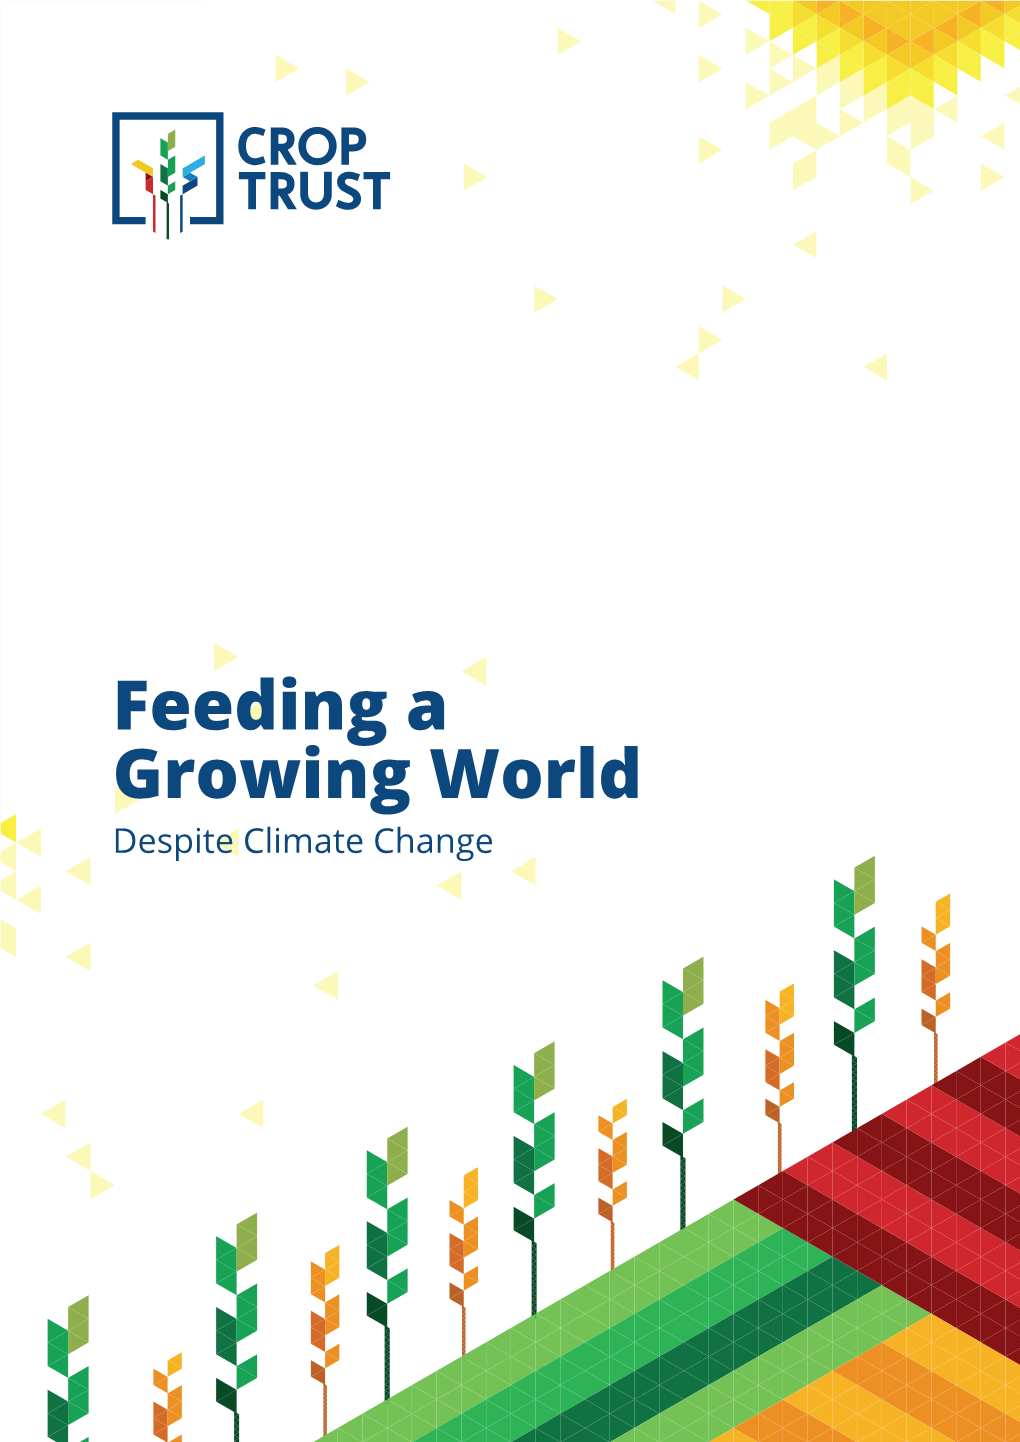 Title Name for Cover Feeding a Growing World